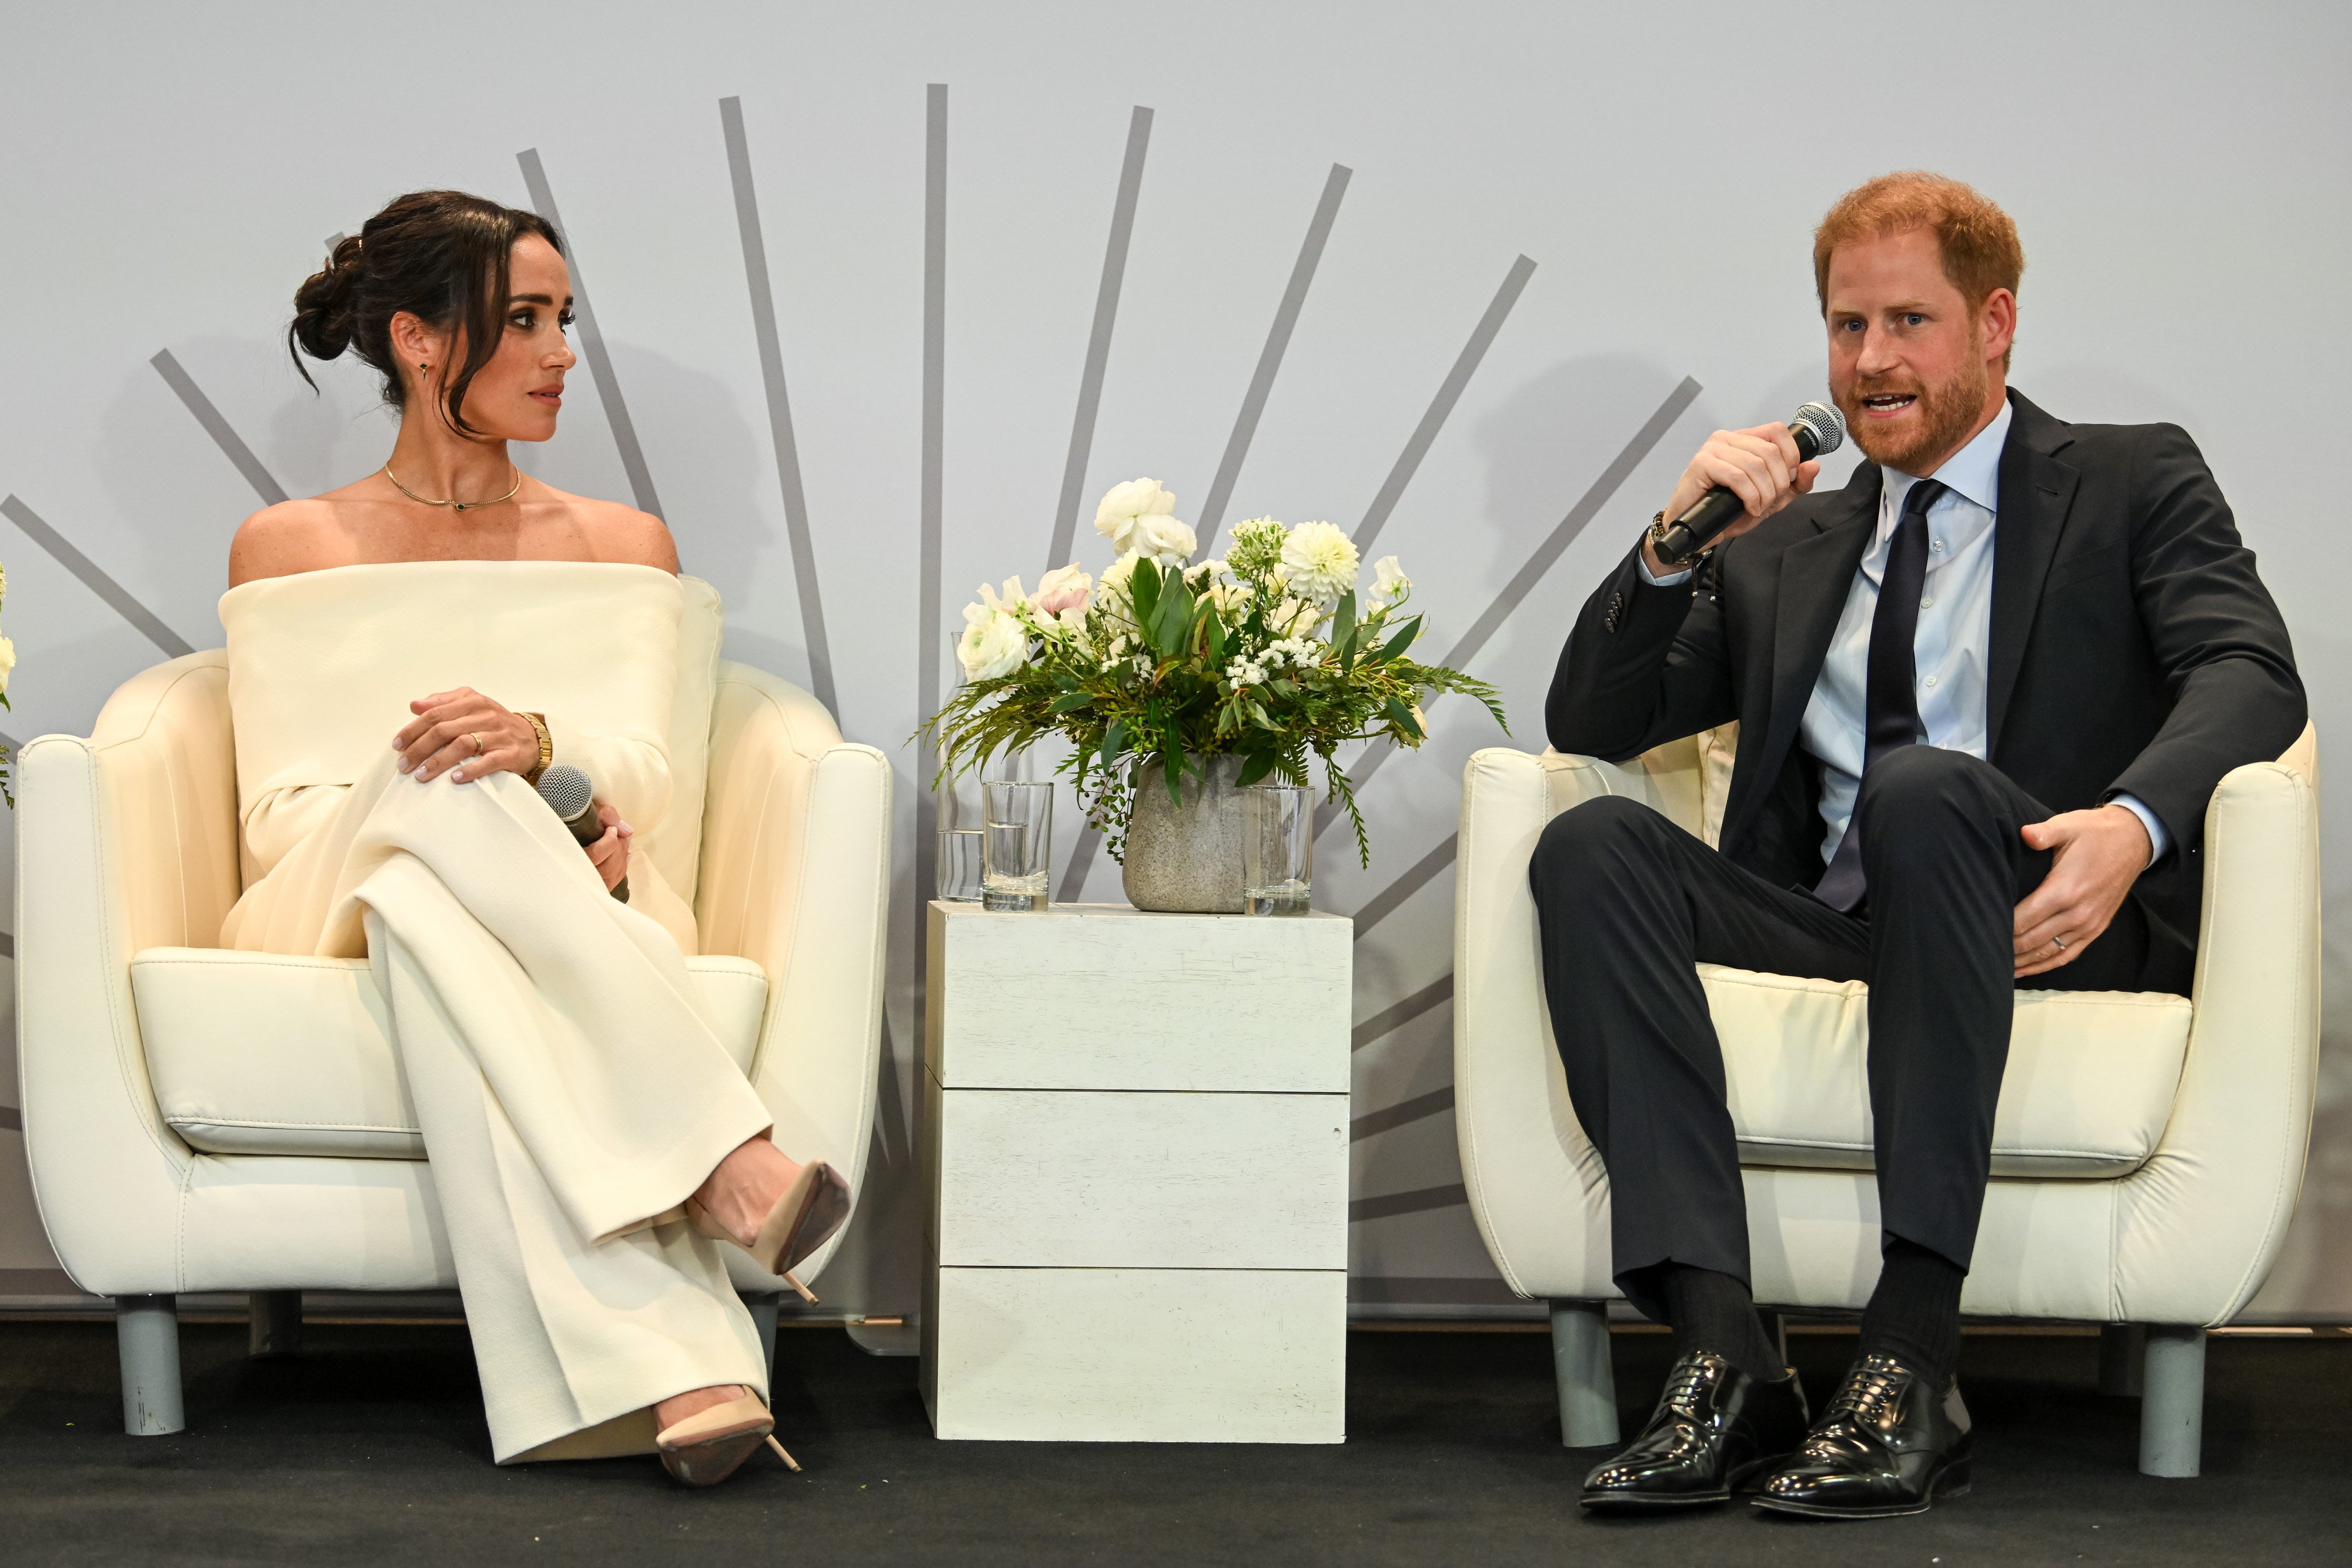 Prince Harry and Meghan Markle Are ‘Doing Nothing to Bridge the Gap’ Between Them and the Royal Family, Expert Says: ‘There Is Absolutely No Sign’